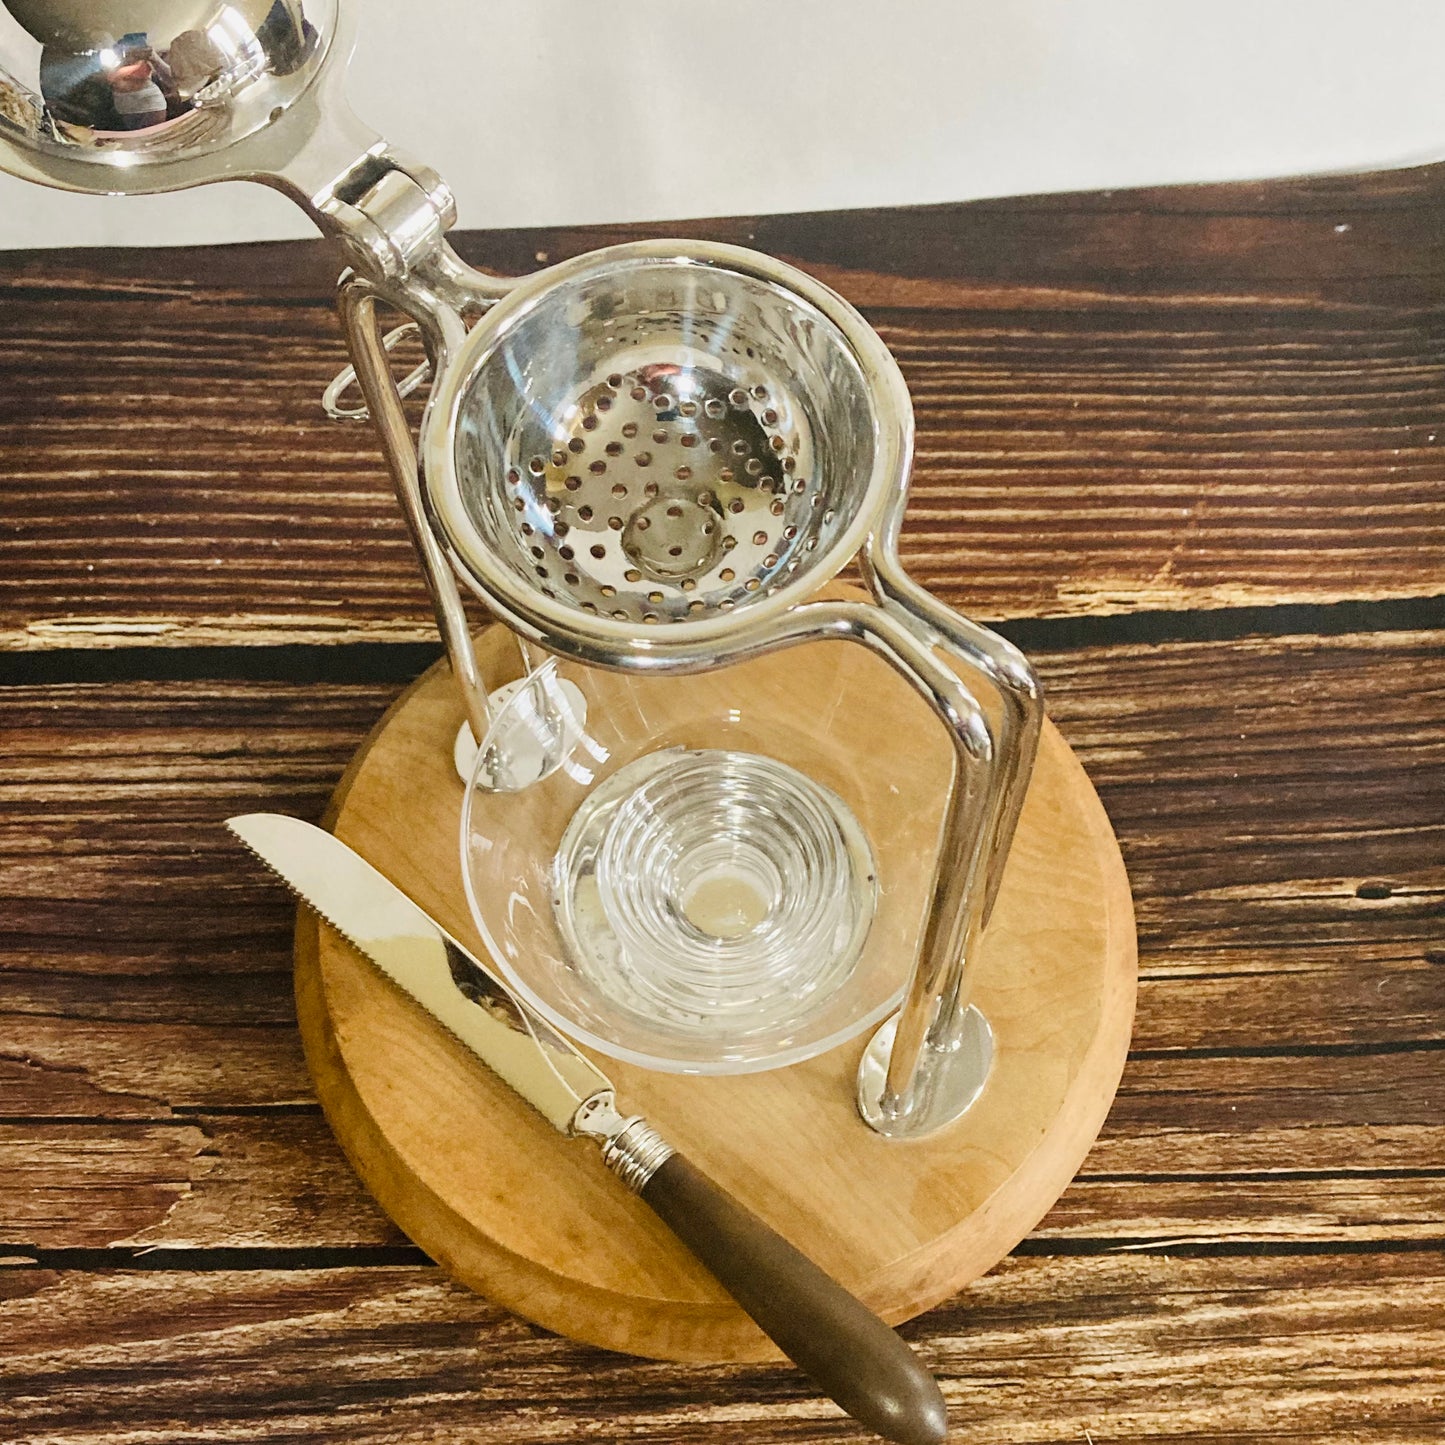 The Duchess Tyler - Antique Silver and Wooden Lemon Juicer